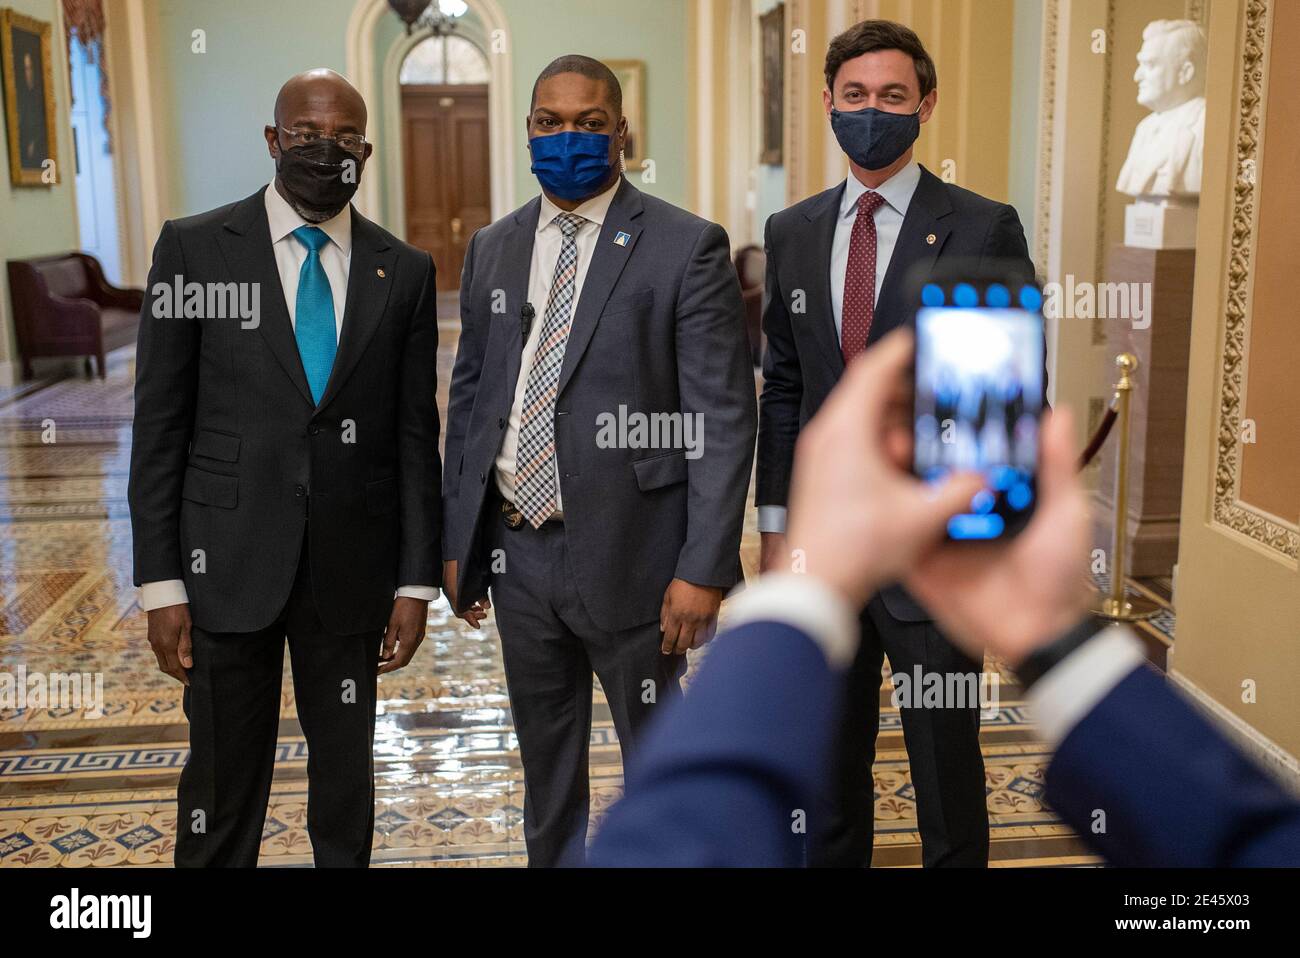 Washington, United States. 21st Jan, 2021. Sen. Raphael Warnock, D-GA, left, and Sen. Jon Ossoff, D-GA, right, pose for a photo with U.S. Capitol Police Officer Eugene Goodman at the U.S. Capitol in Washington, DC on Thursday, January 21, 2021. Goodman was responsible for redirecting Trump-mob supporters away from the Senate chamber during the attack on the U.S. Capitol on January 6. Photo by Ken Cedeno/UPI Credit: UPI/Alamy Live News Stock Photo